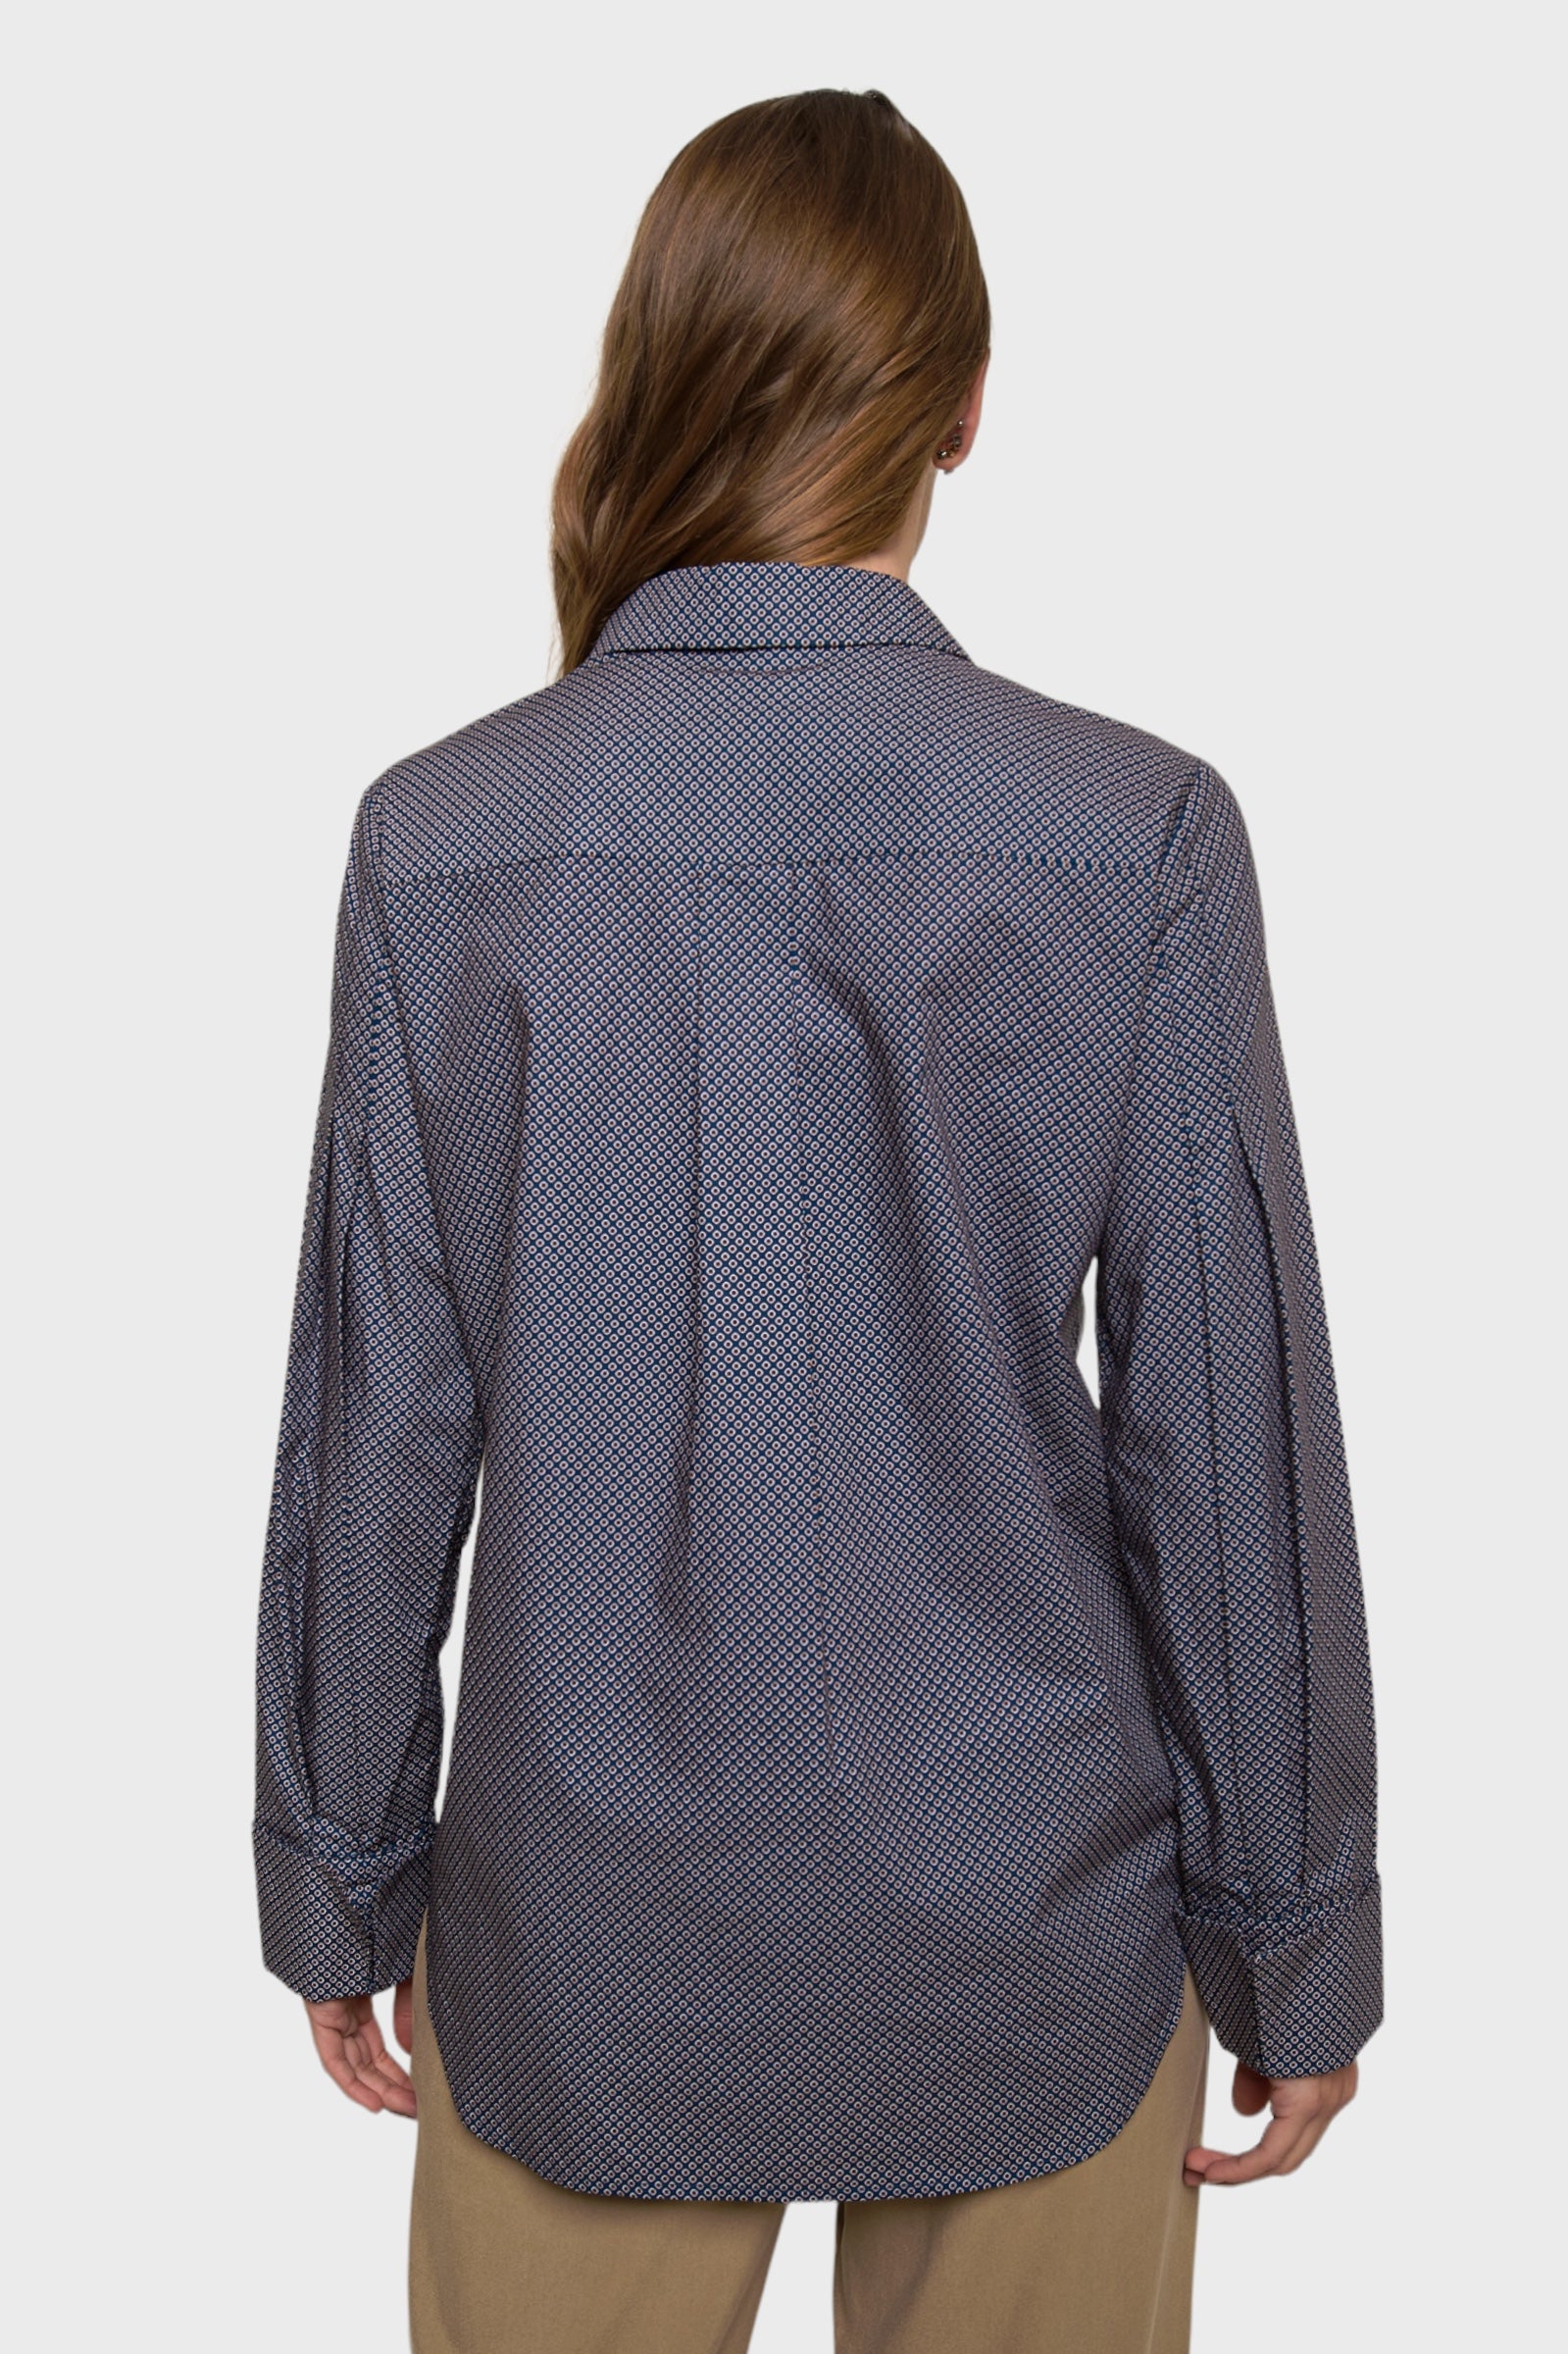 Eva Half-Button Up Polka-Dot Long Sleeve Cotton Shirt  Women's by Marise.Eco.Couture, made in Italy